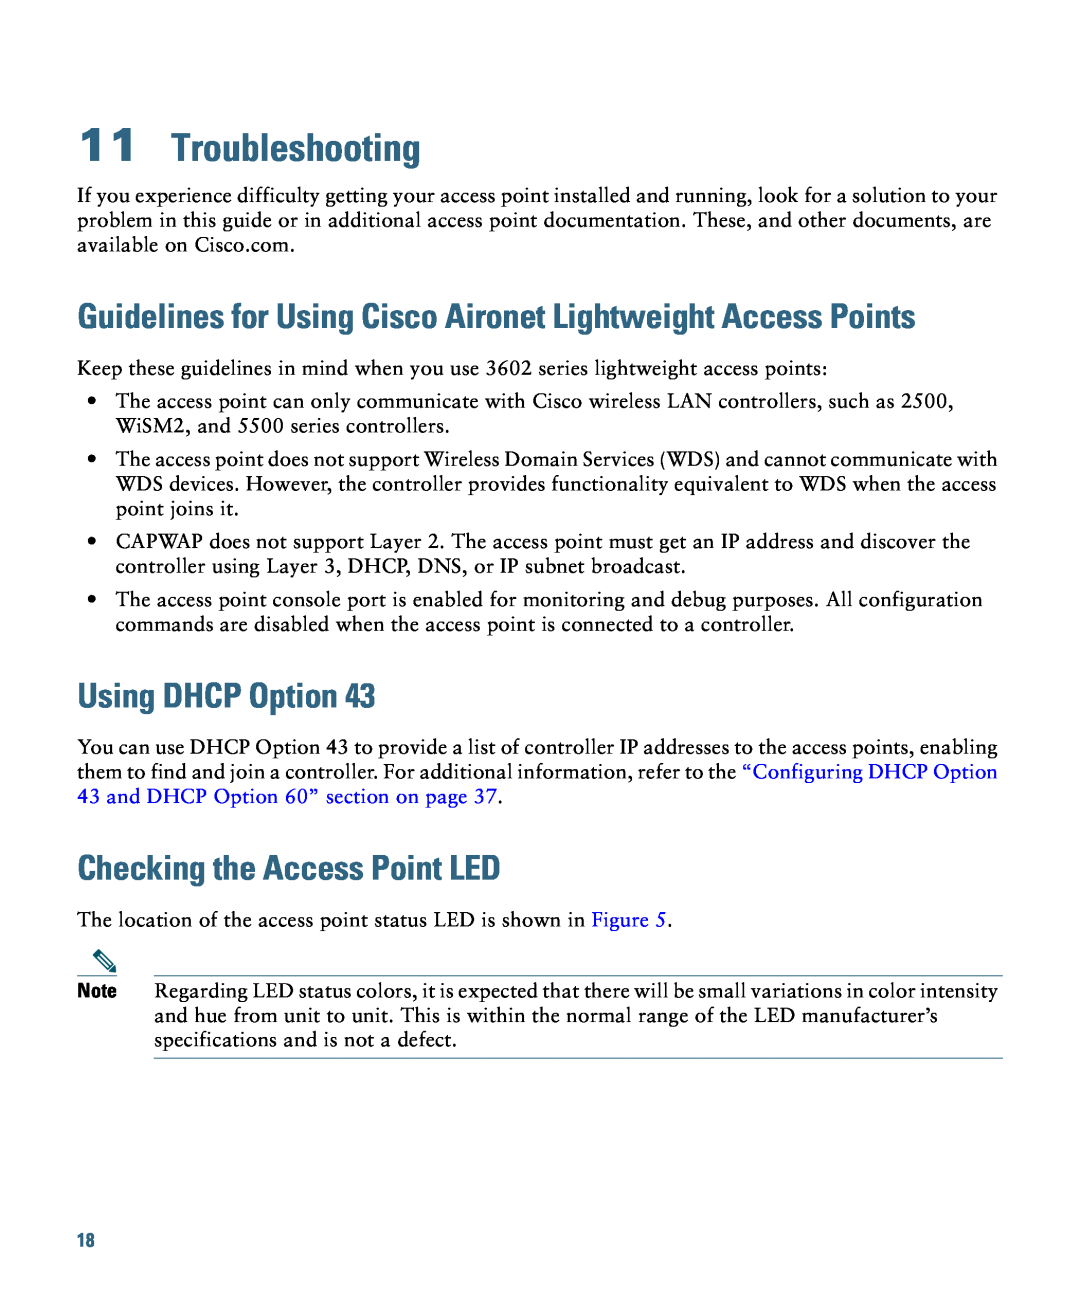 Cisco Systems AIRCAP3602EAK9, AIRCAP3602ITK9 Troubleshooting, Guidelines for Using Cisco Aironet Lightweight Access Points 